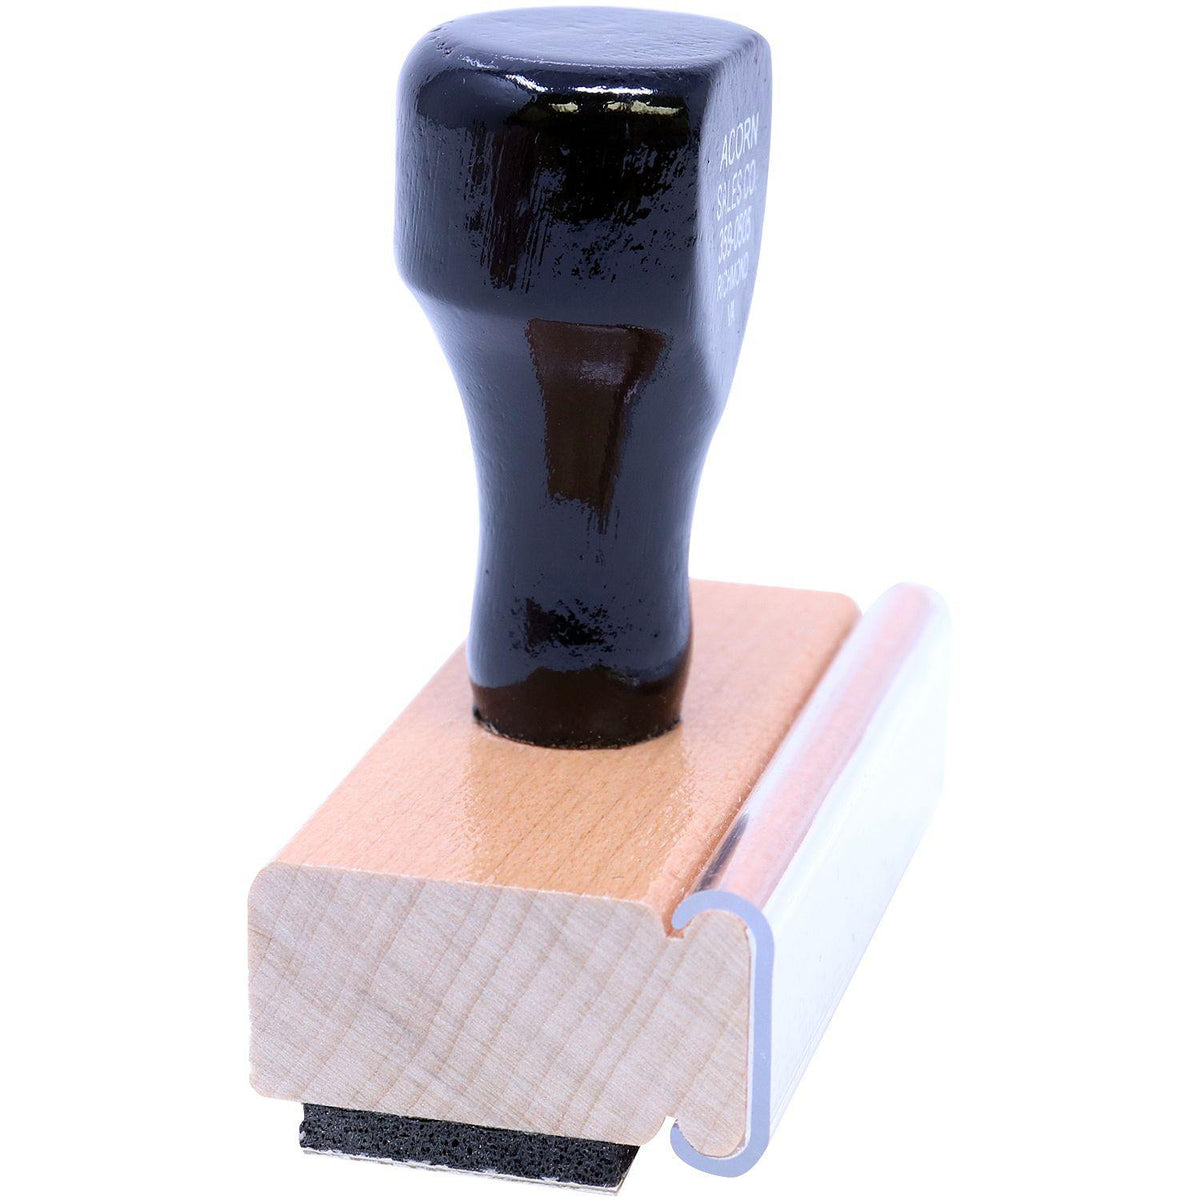 Side View of Attorneys Copy Rubber Stamp at an Angle